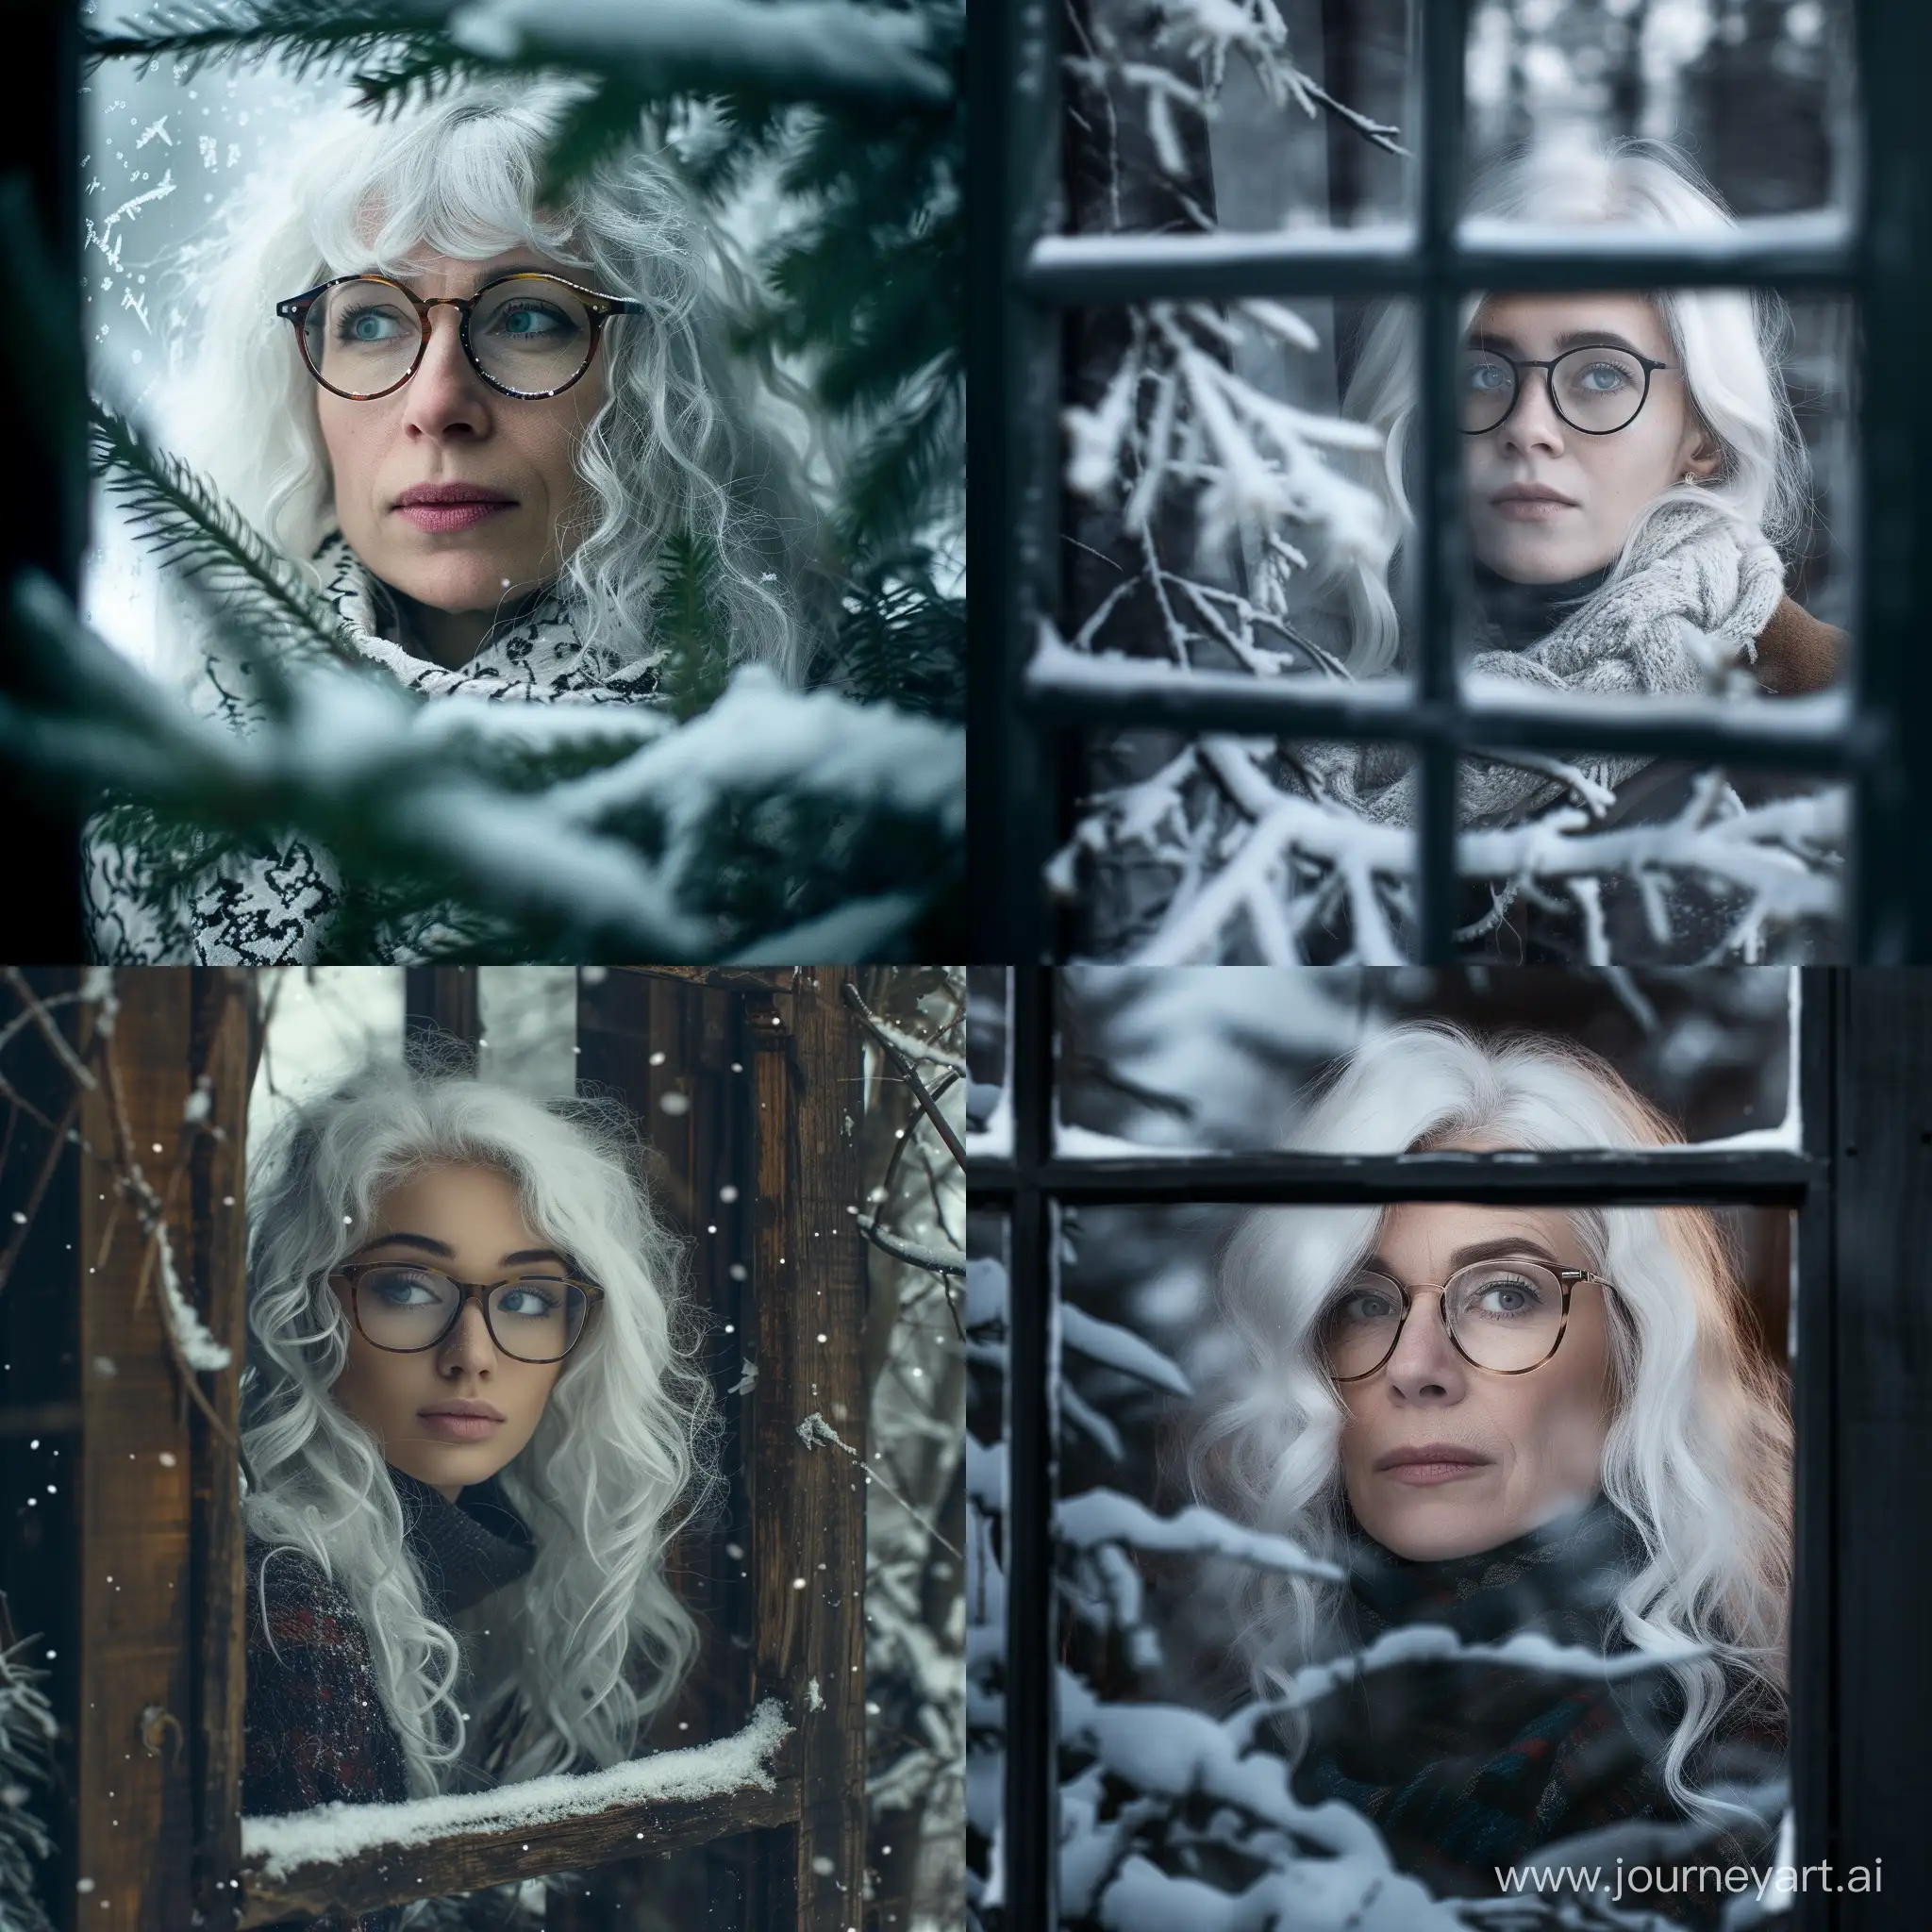 Snowy-Forest-Reflection-Elegant-Woman-with-White-Hair-and-Glasses